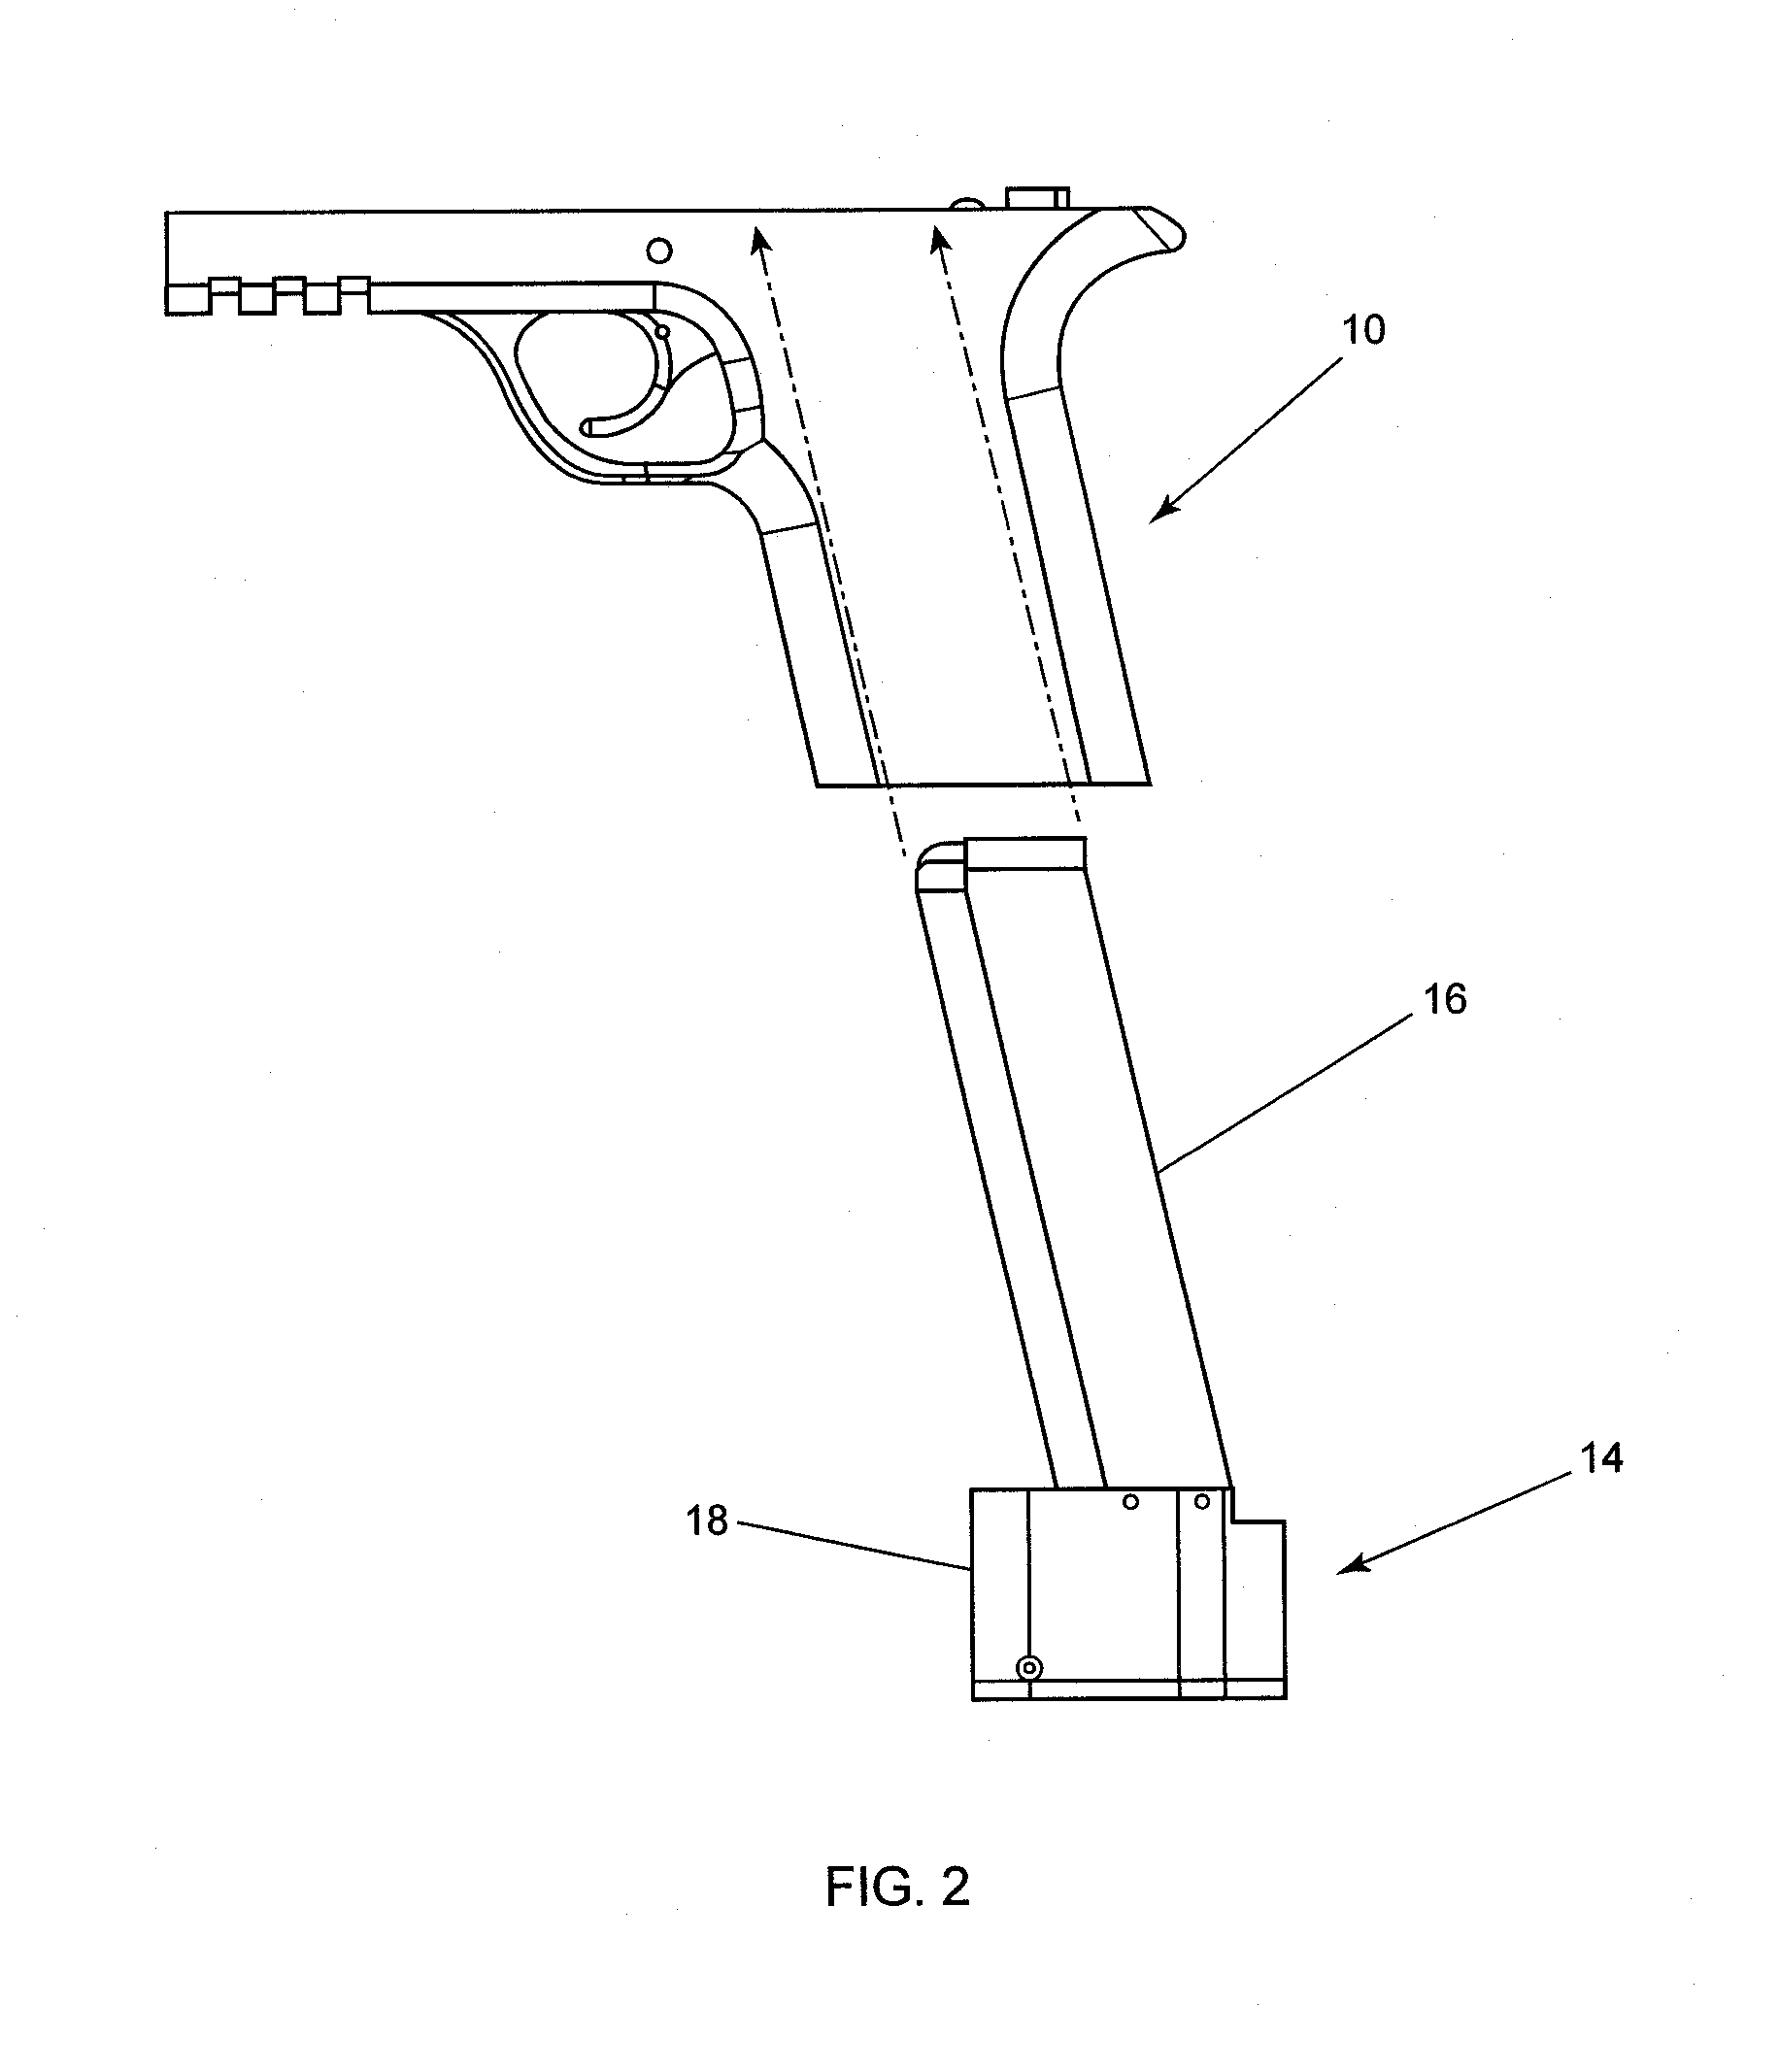 Magazine based, firearm safety apparatus for modifying existing firearms employing a digital, close proximity communications system and a low power electro-permanent magnet interlock system